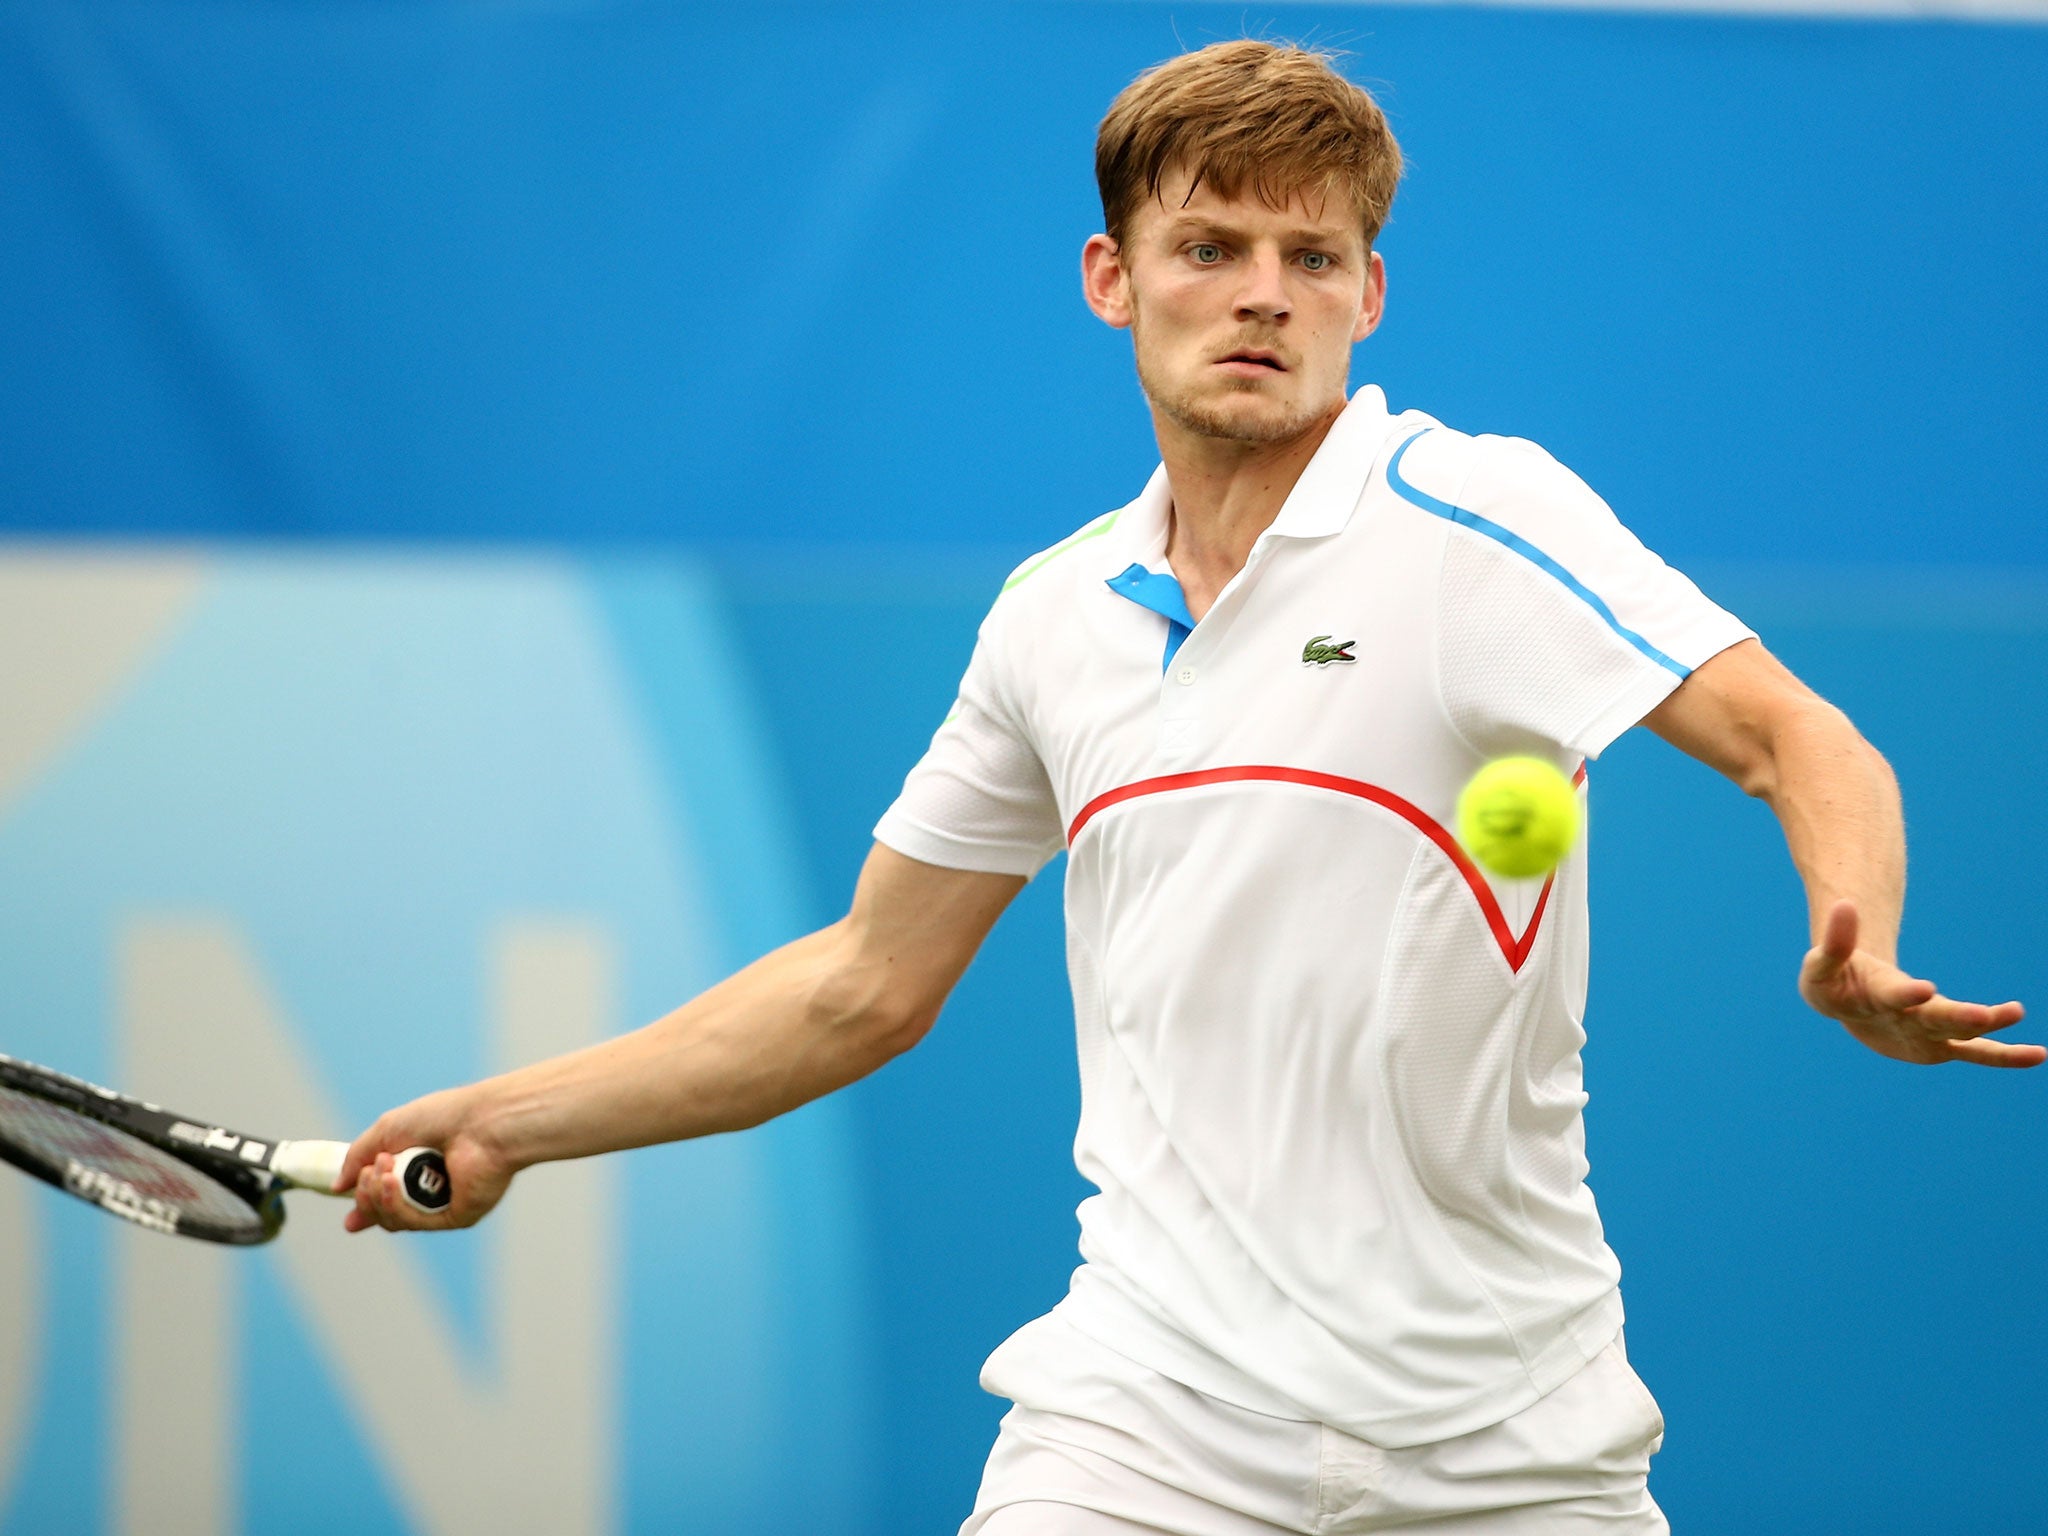 David Goffin in action at Queen's Club two weeks ago